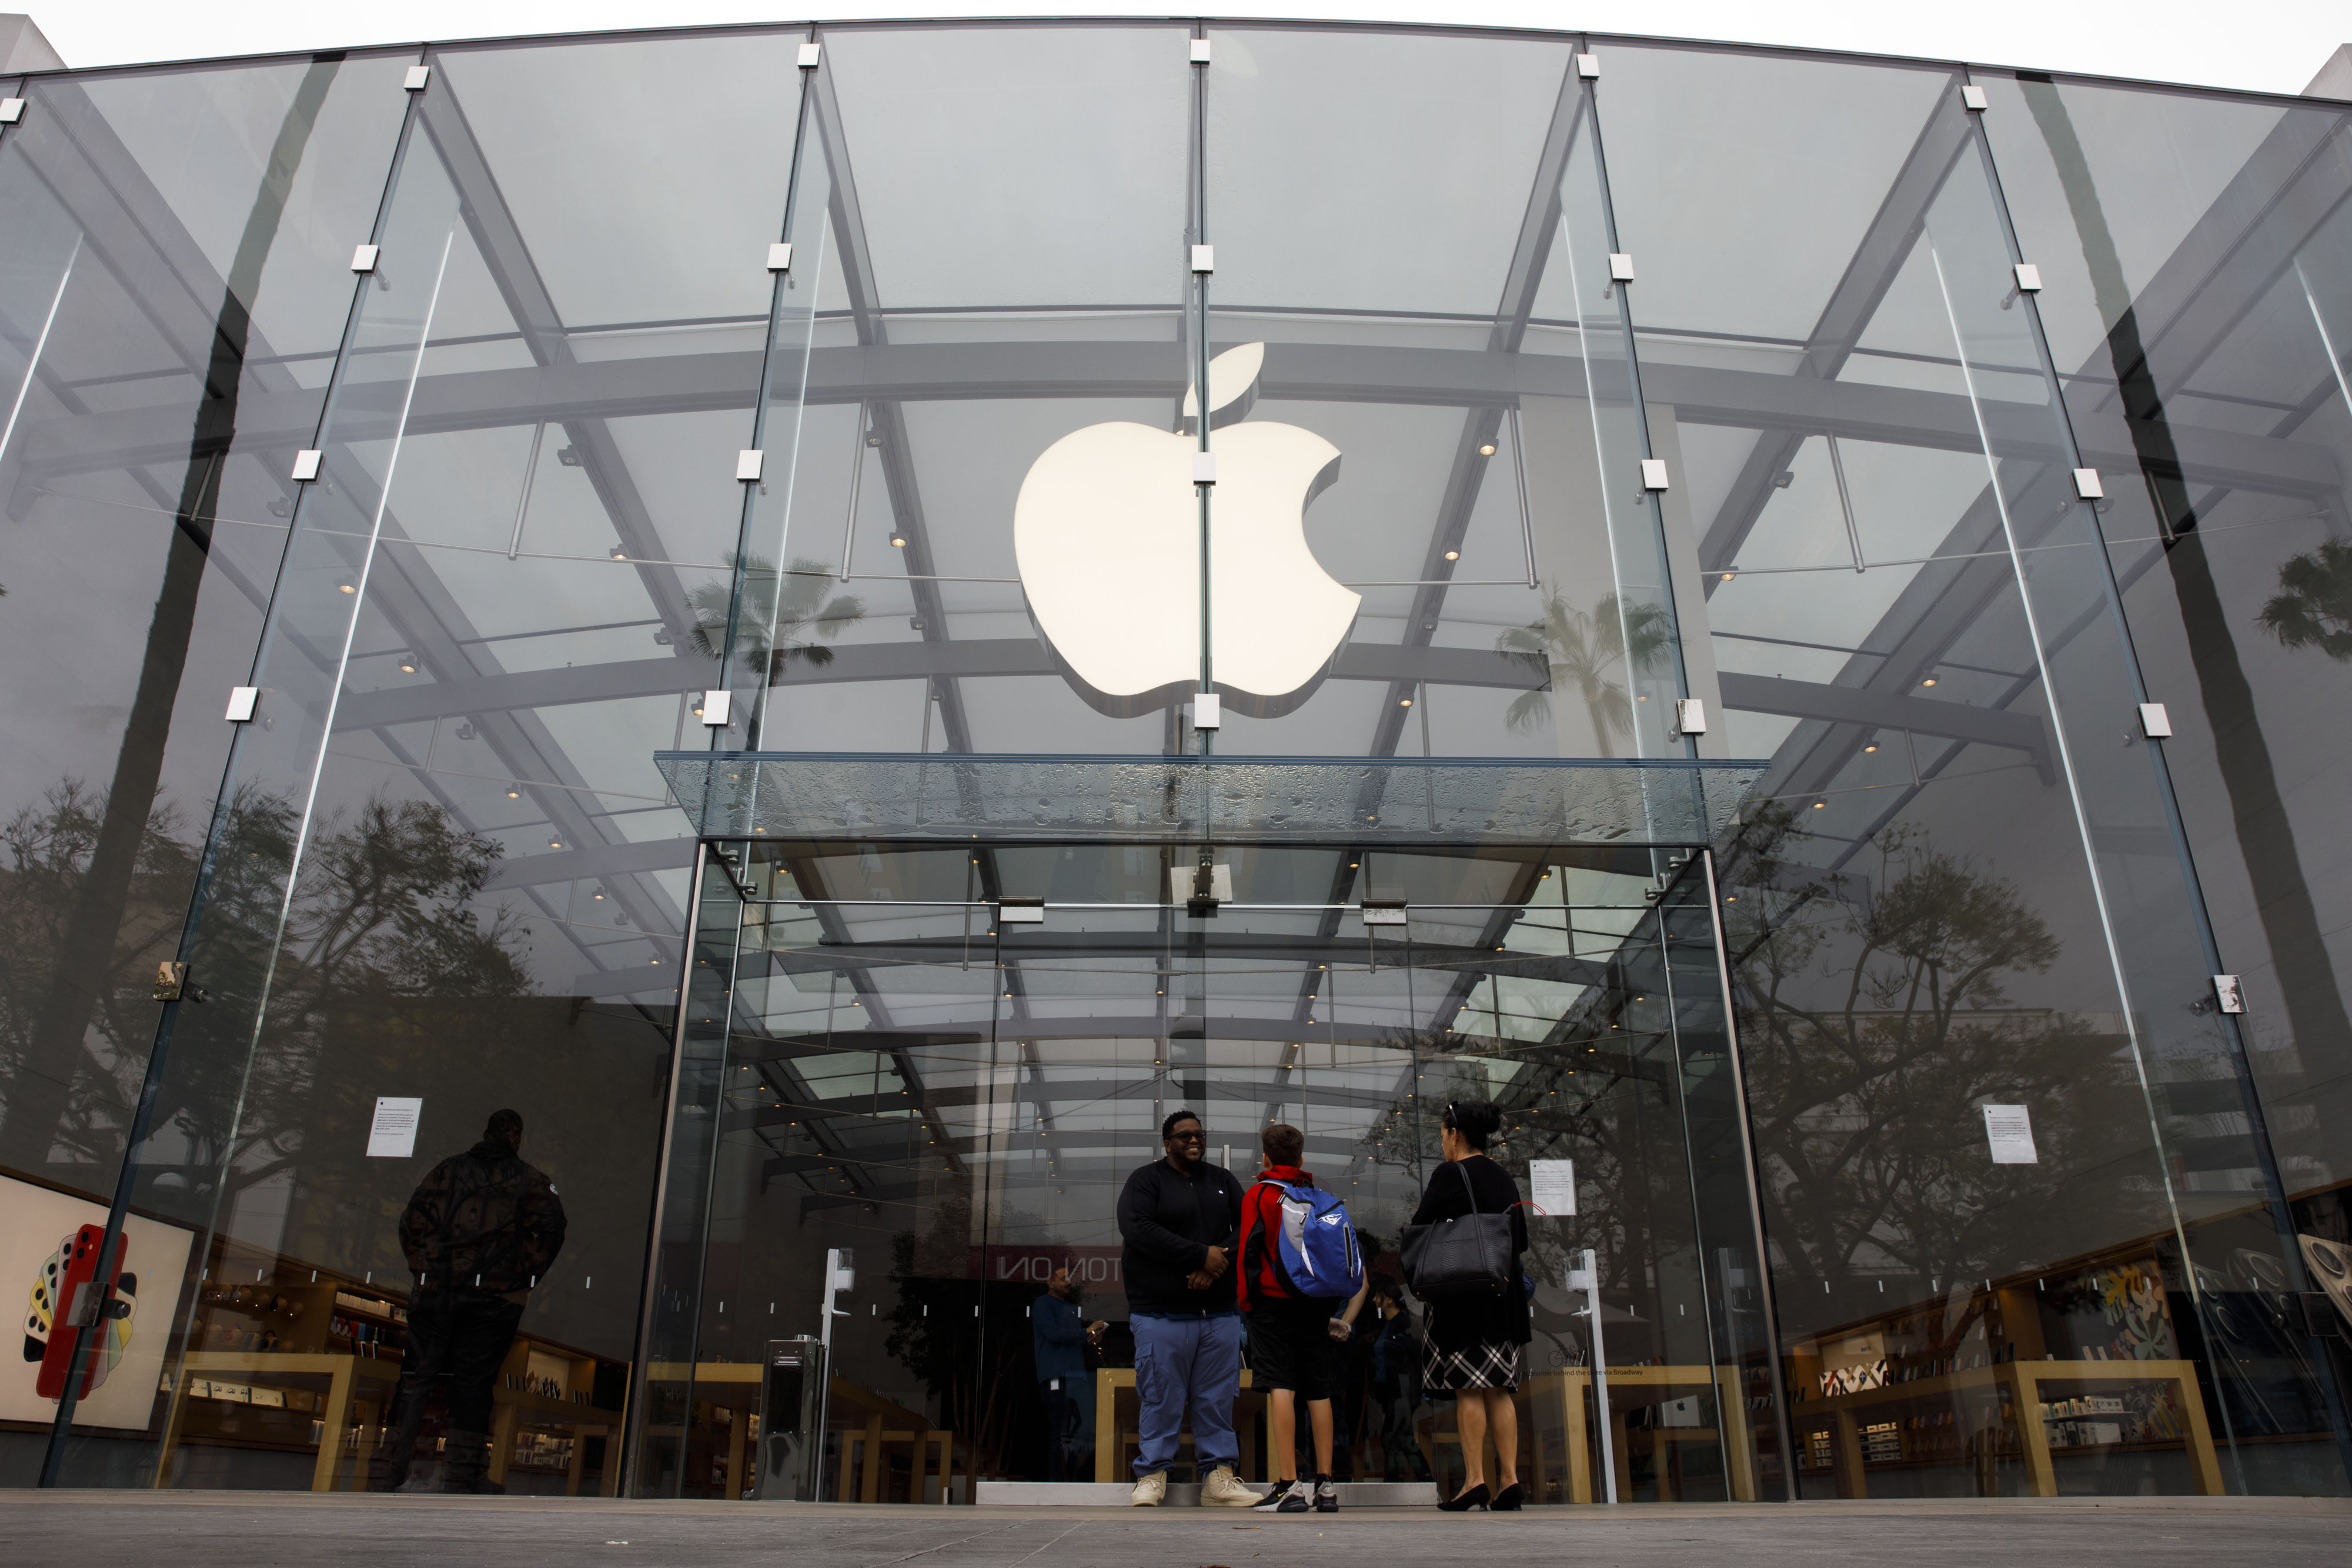 Apple Tells Staff U.S. Stores to Remain Closed Until Early May - Bloomberg